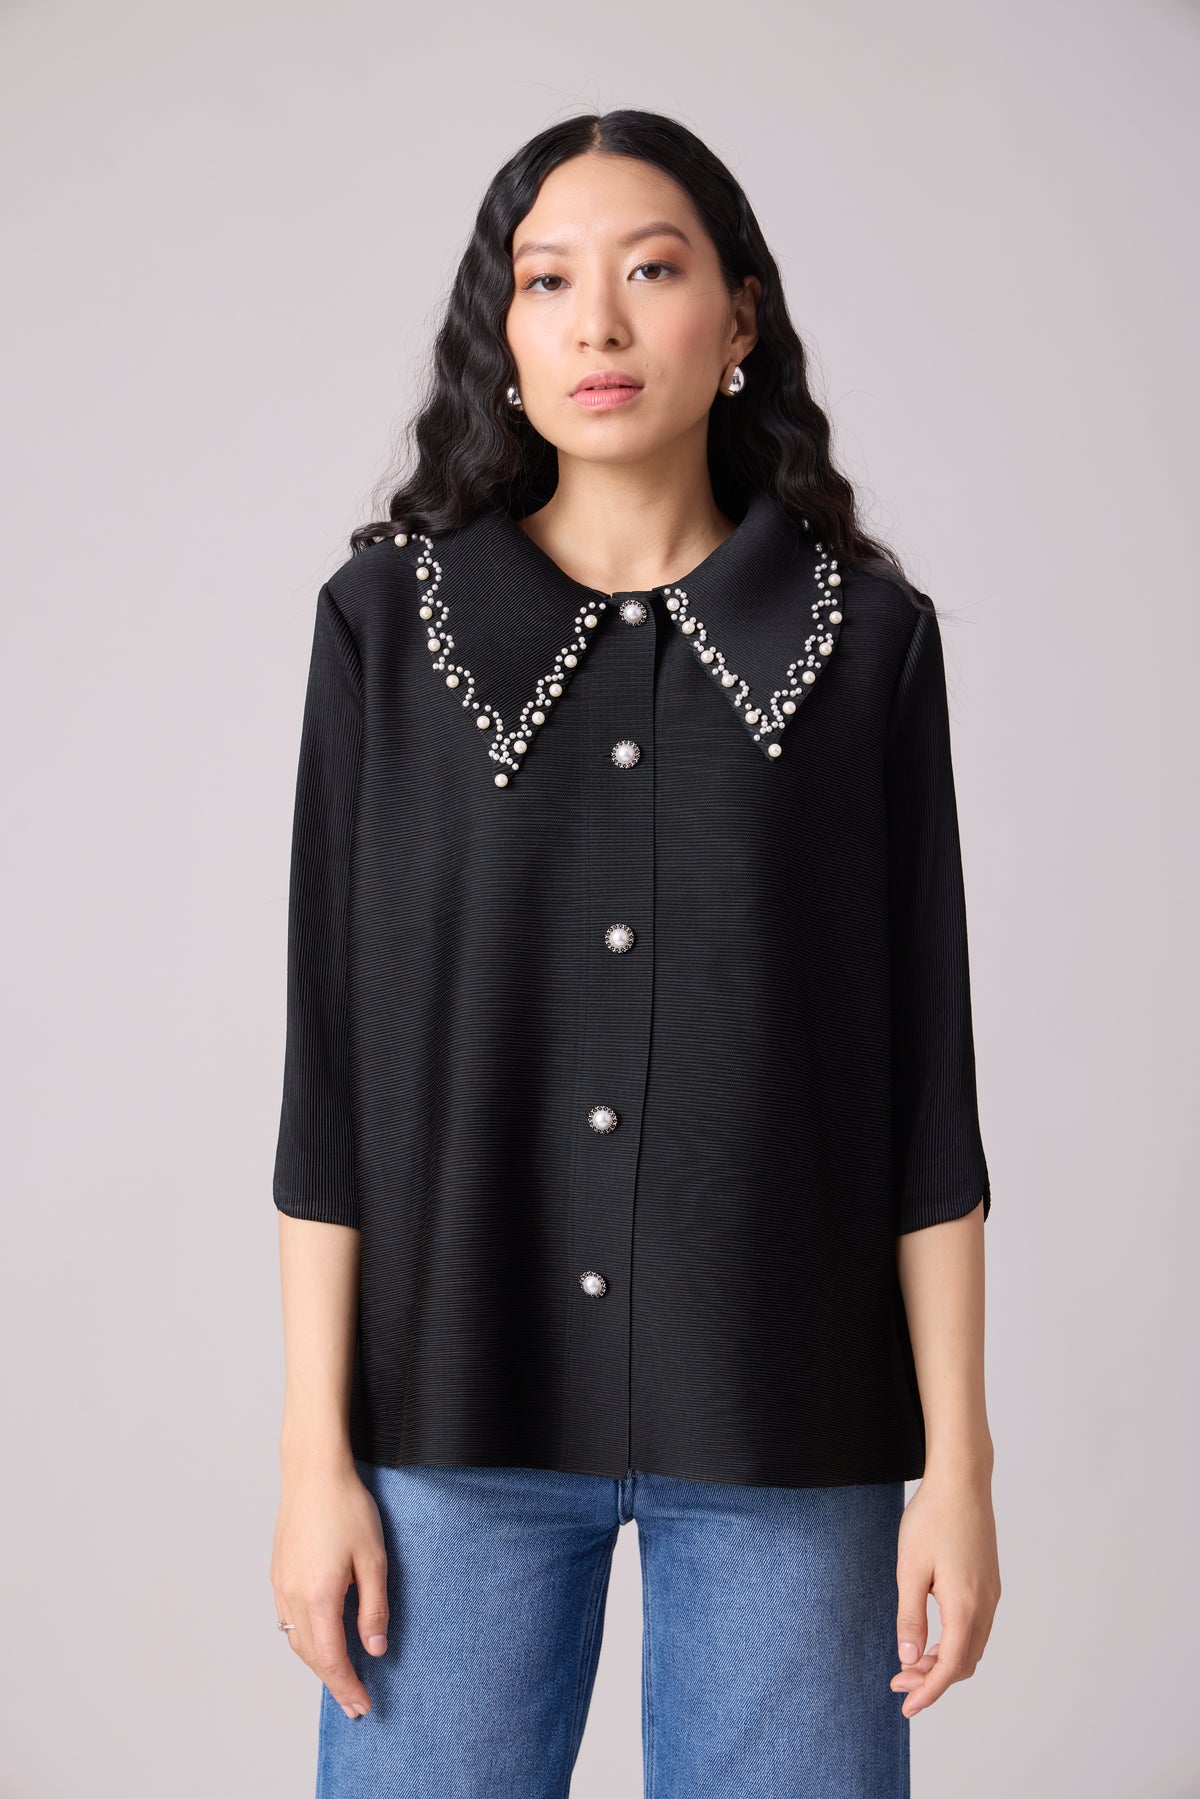 Maise Pearled Shirt Top - Black